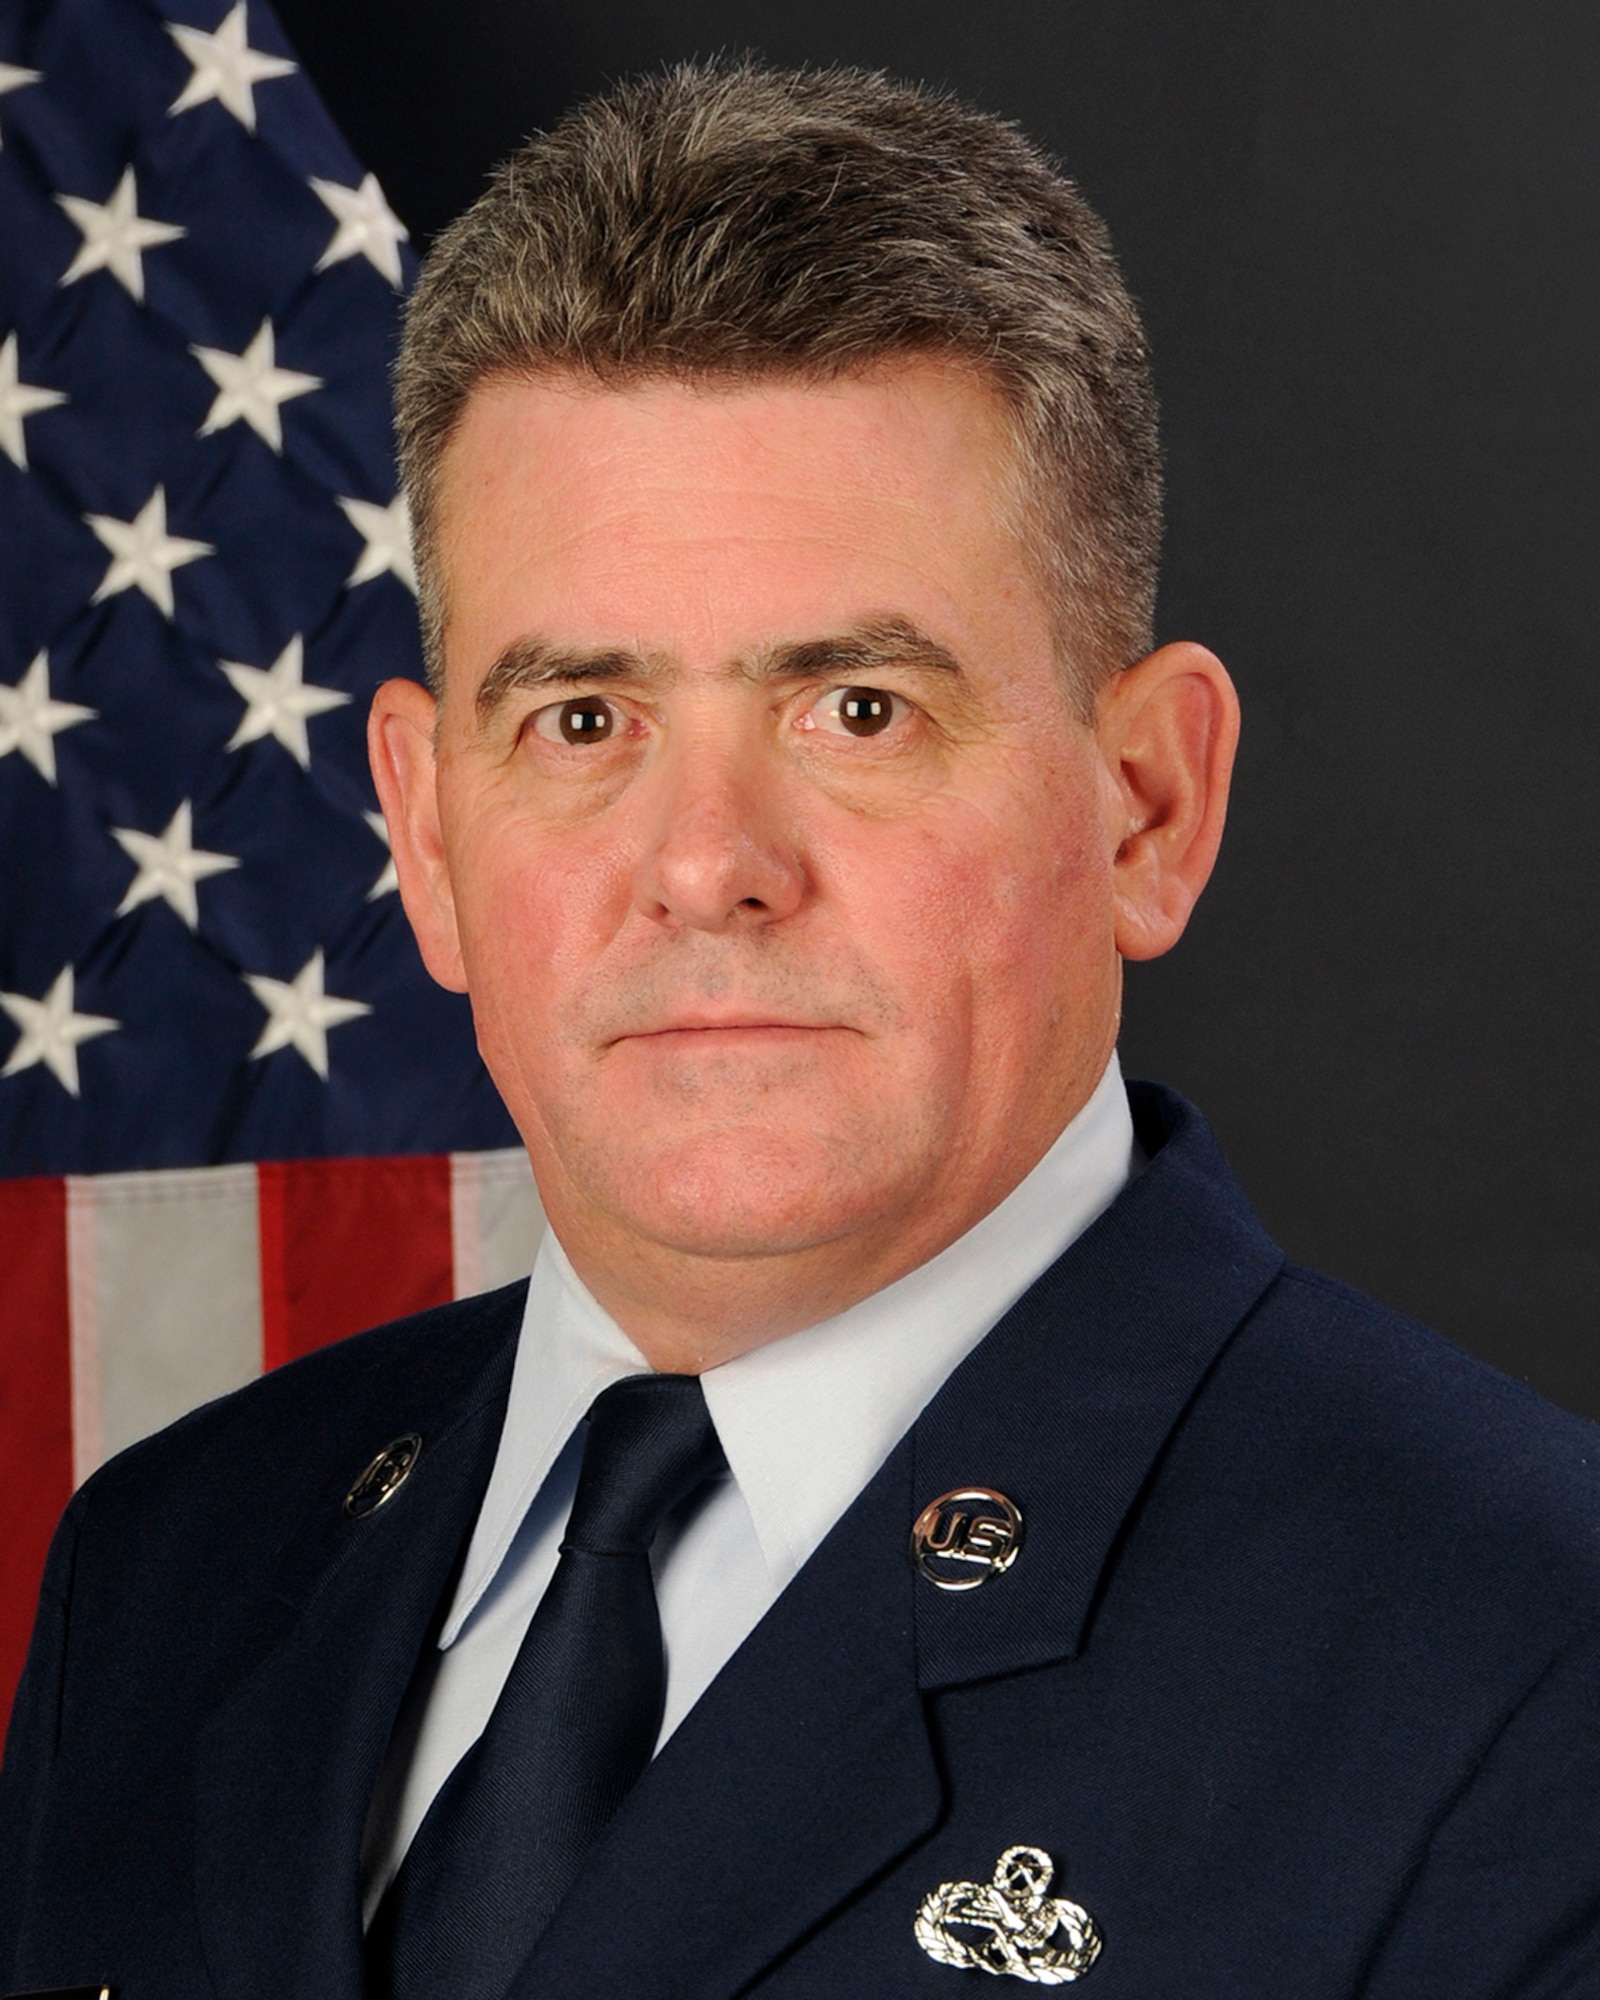 U.S. Air Force portrait of Chief Master Sgt. Robert Thibault, from the 169th Aircraft Maintenance Squadron of the South Carolina Air National Guard. (U.S. Air National Guard Photo by Tech. Sgt. Caycee Watson/Released)